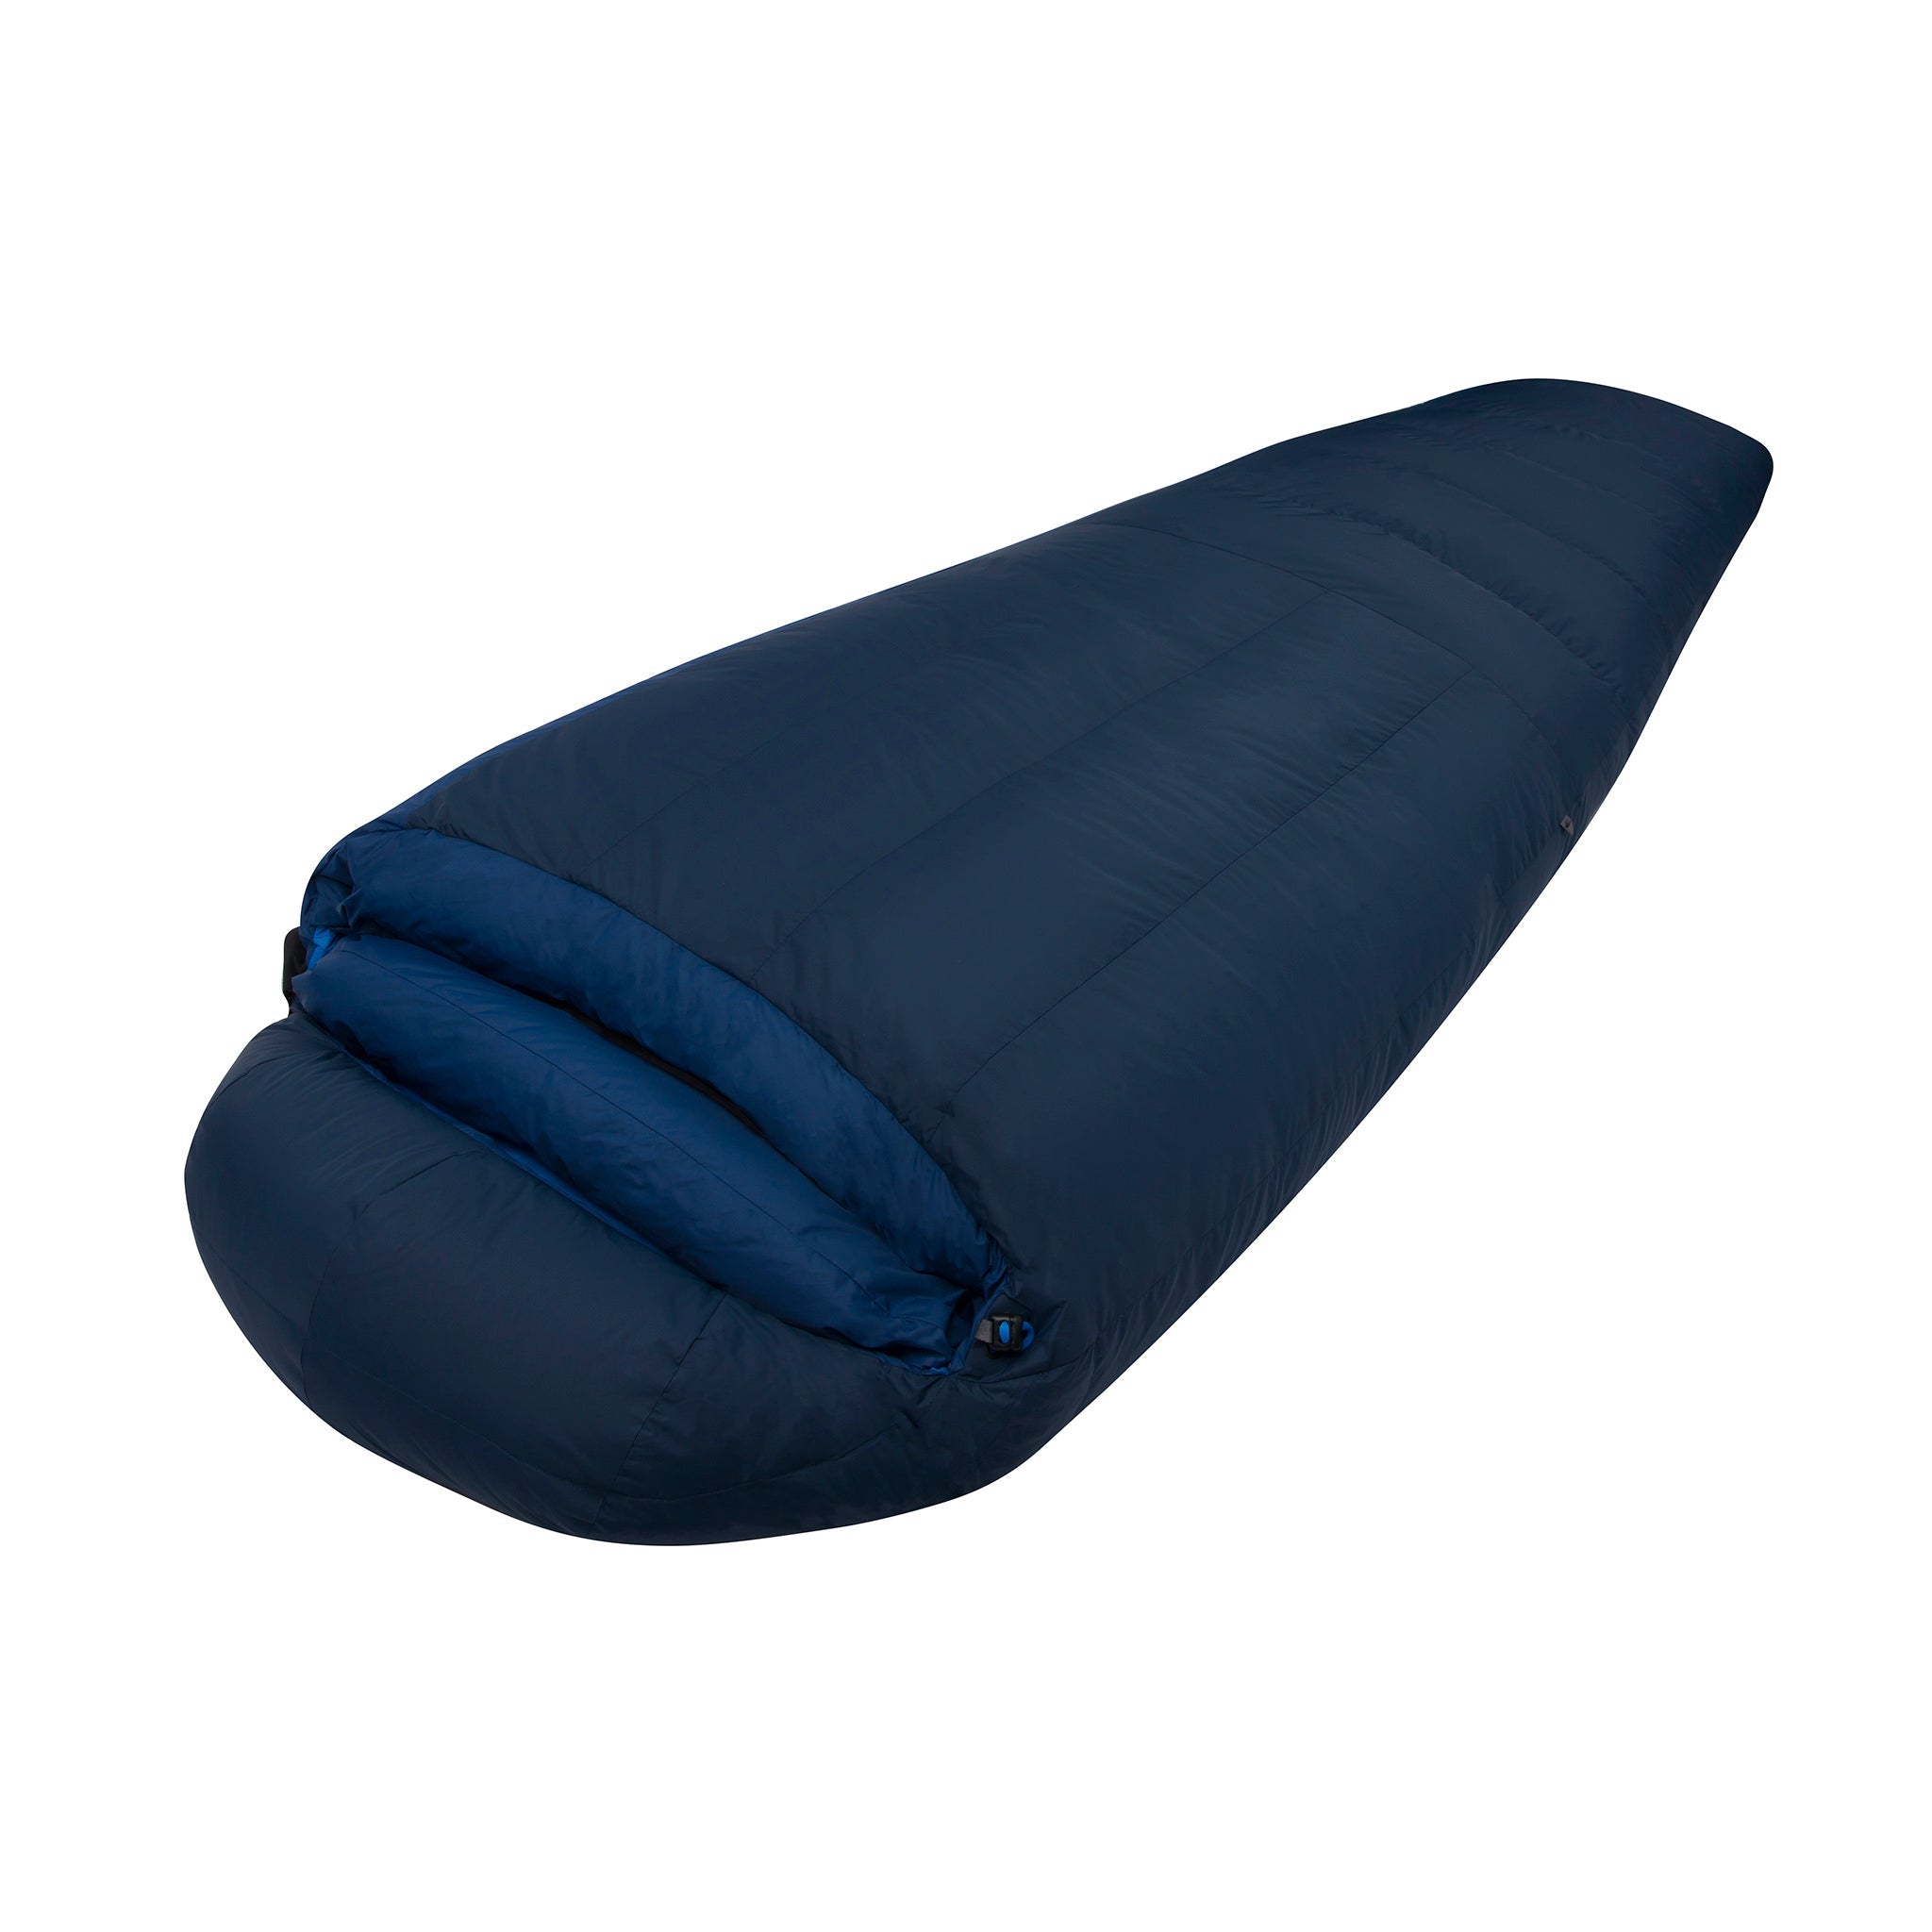 Sleeping Bag for Adults Large Size Connectable 0F High Quality Mummy  Sleeping Bags Camping Traveling Hiking and Backpacking with Free Stuff Sack  - Walmart.com